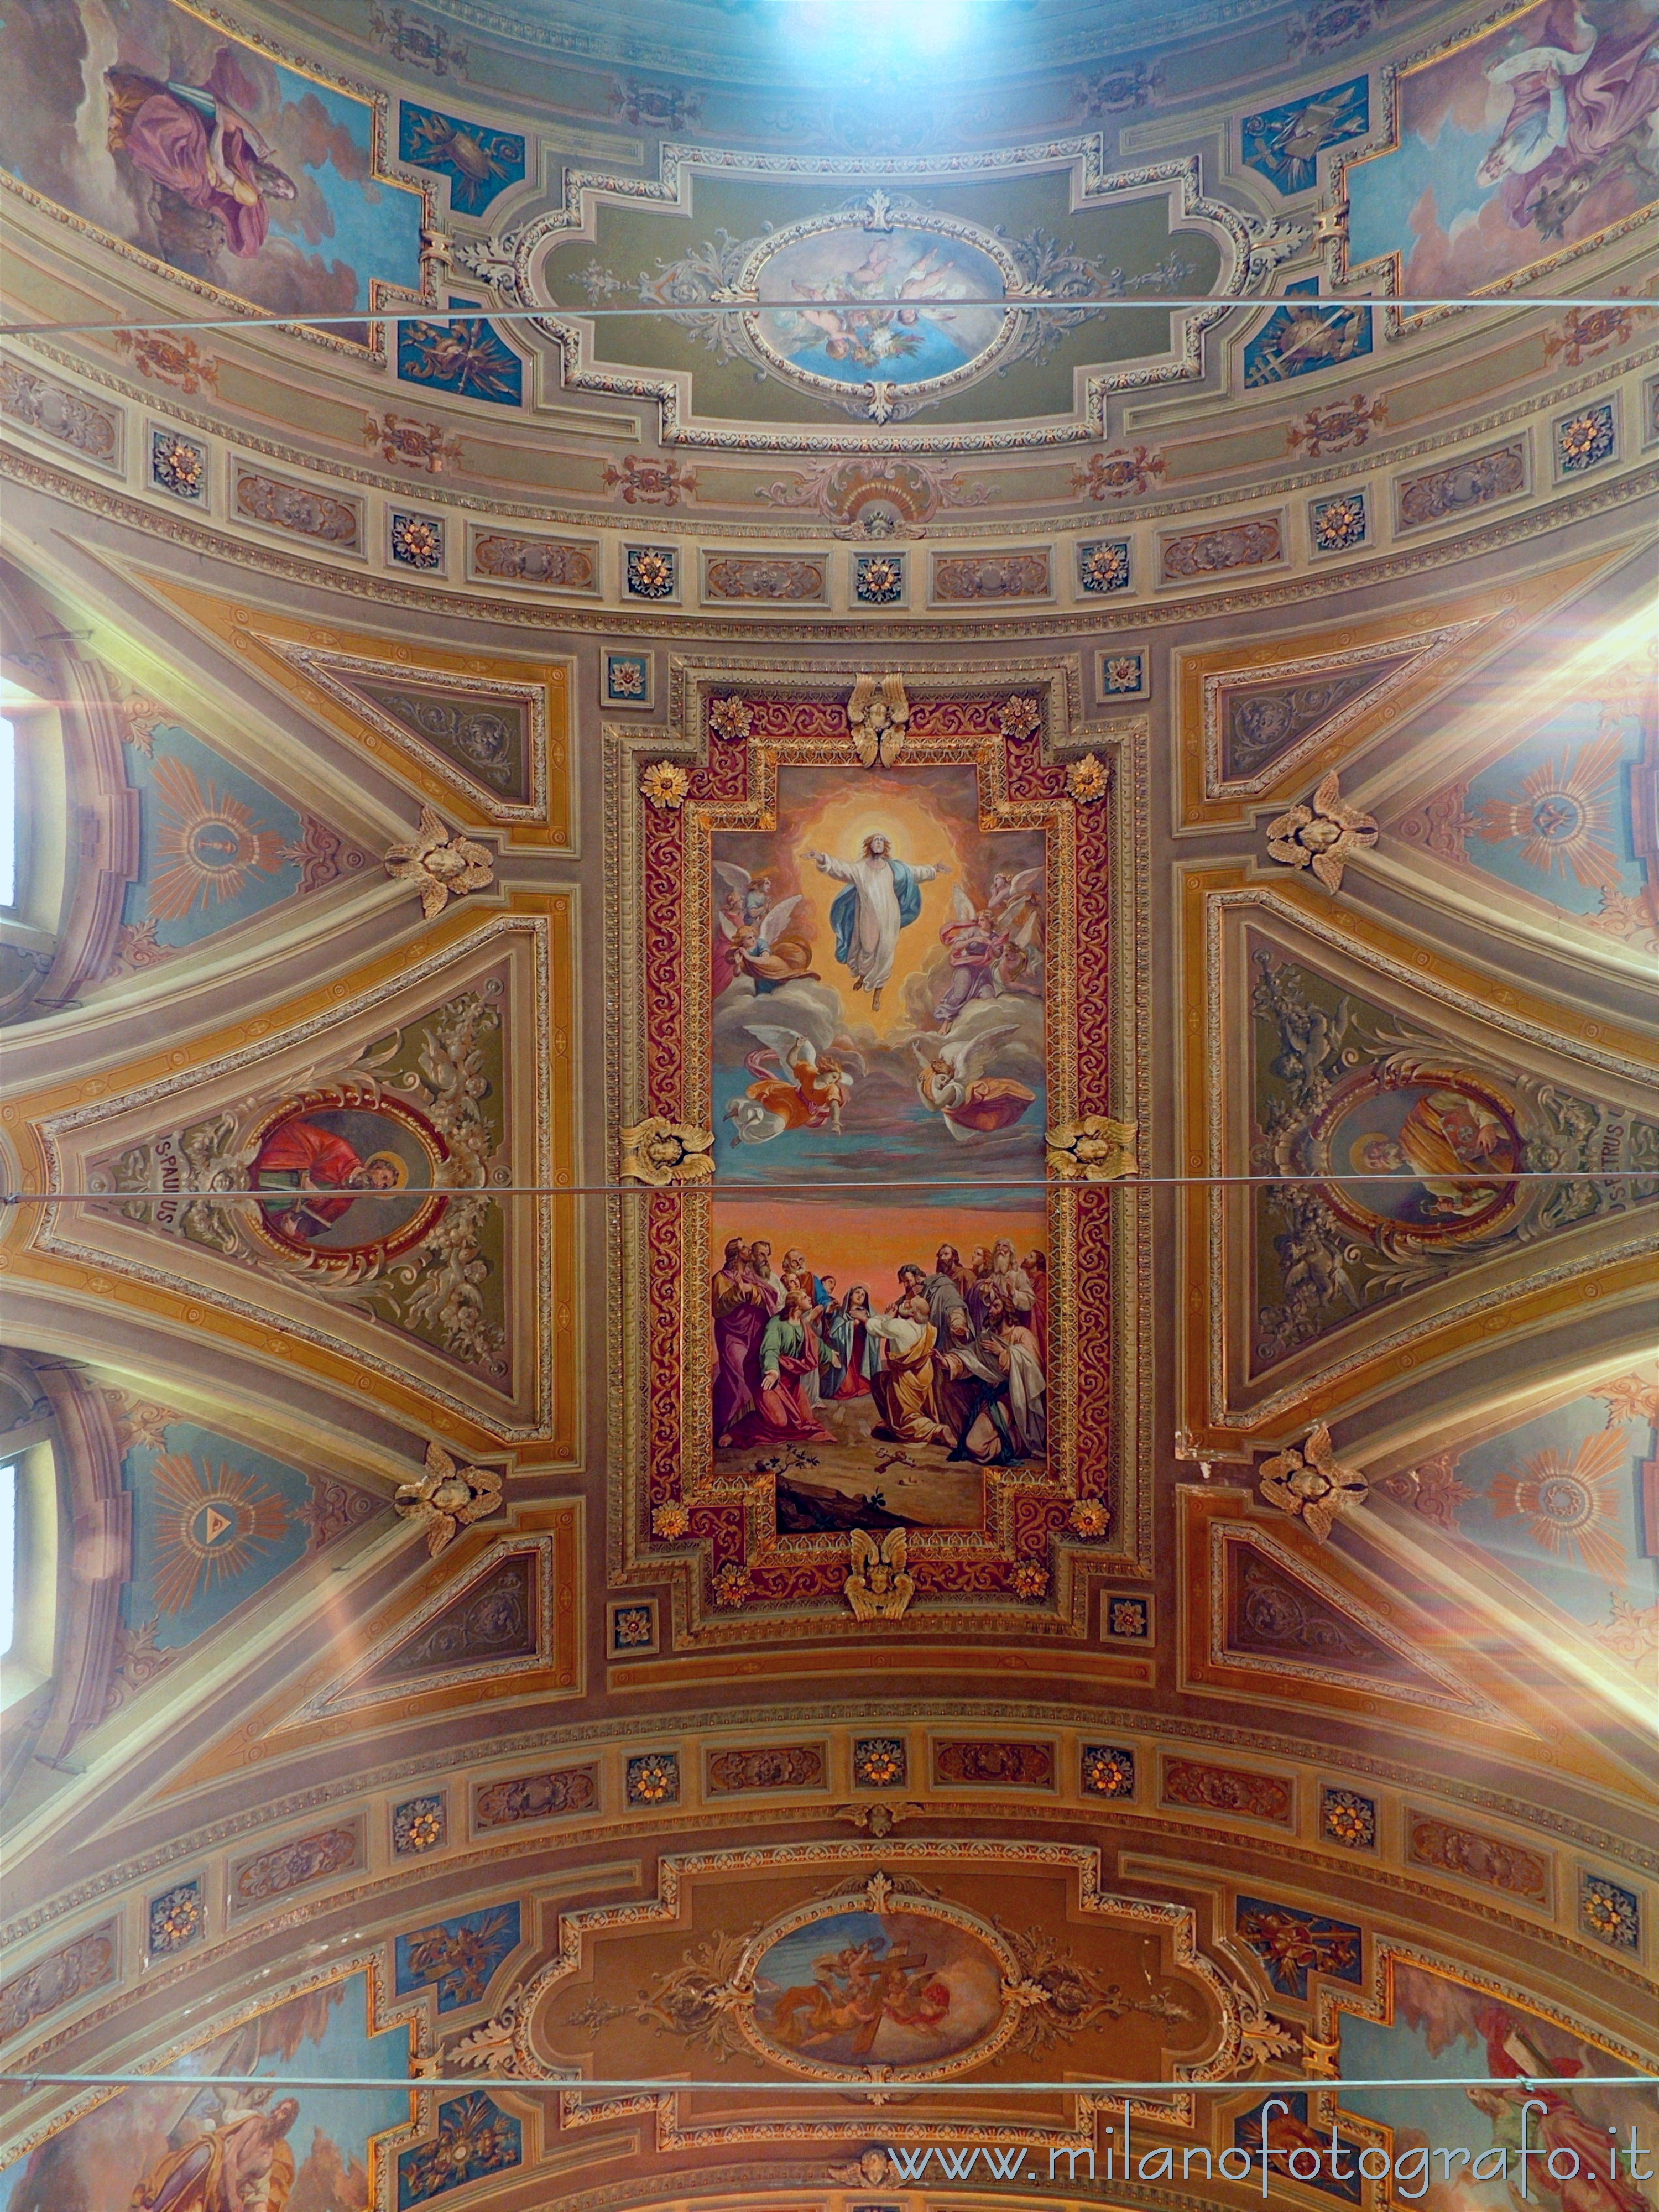 Oggiono (Lecco, Italy): Vault of the nave of the Church of Sant'Eufemia - Oggiono (Lecco, Italy)